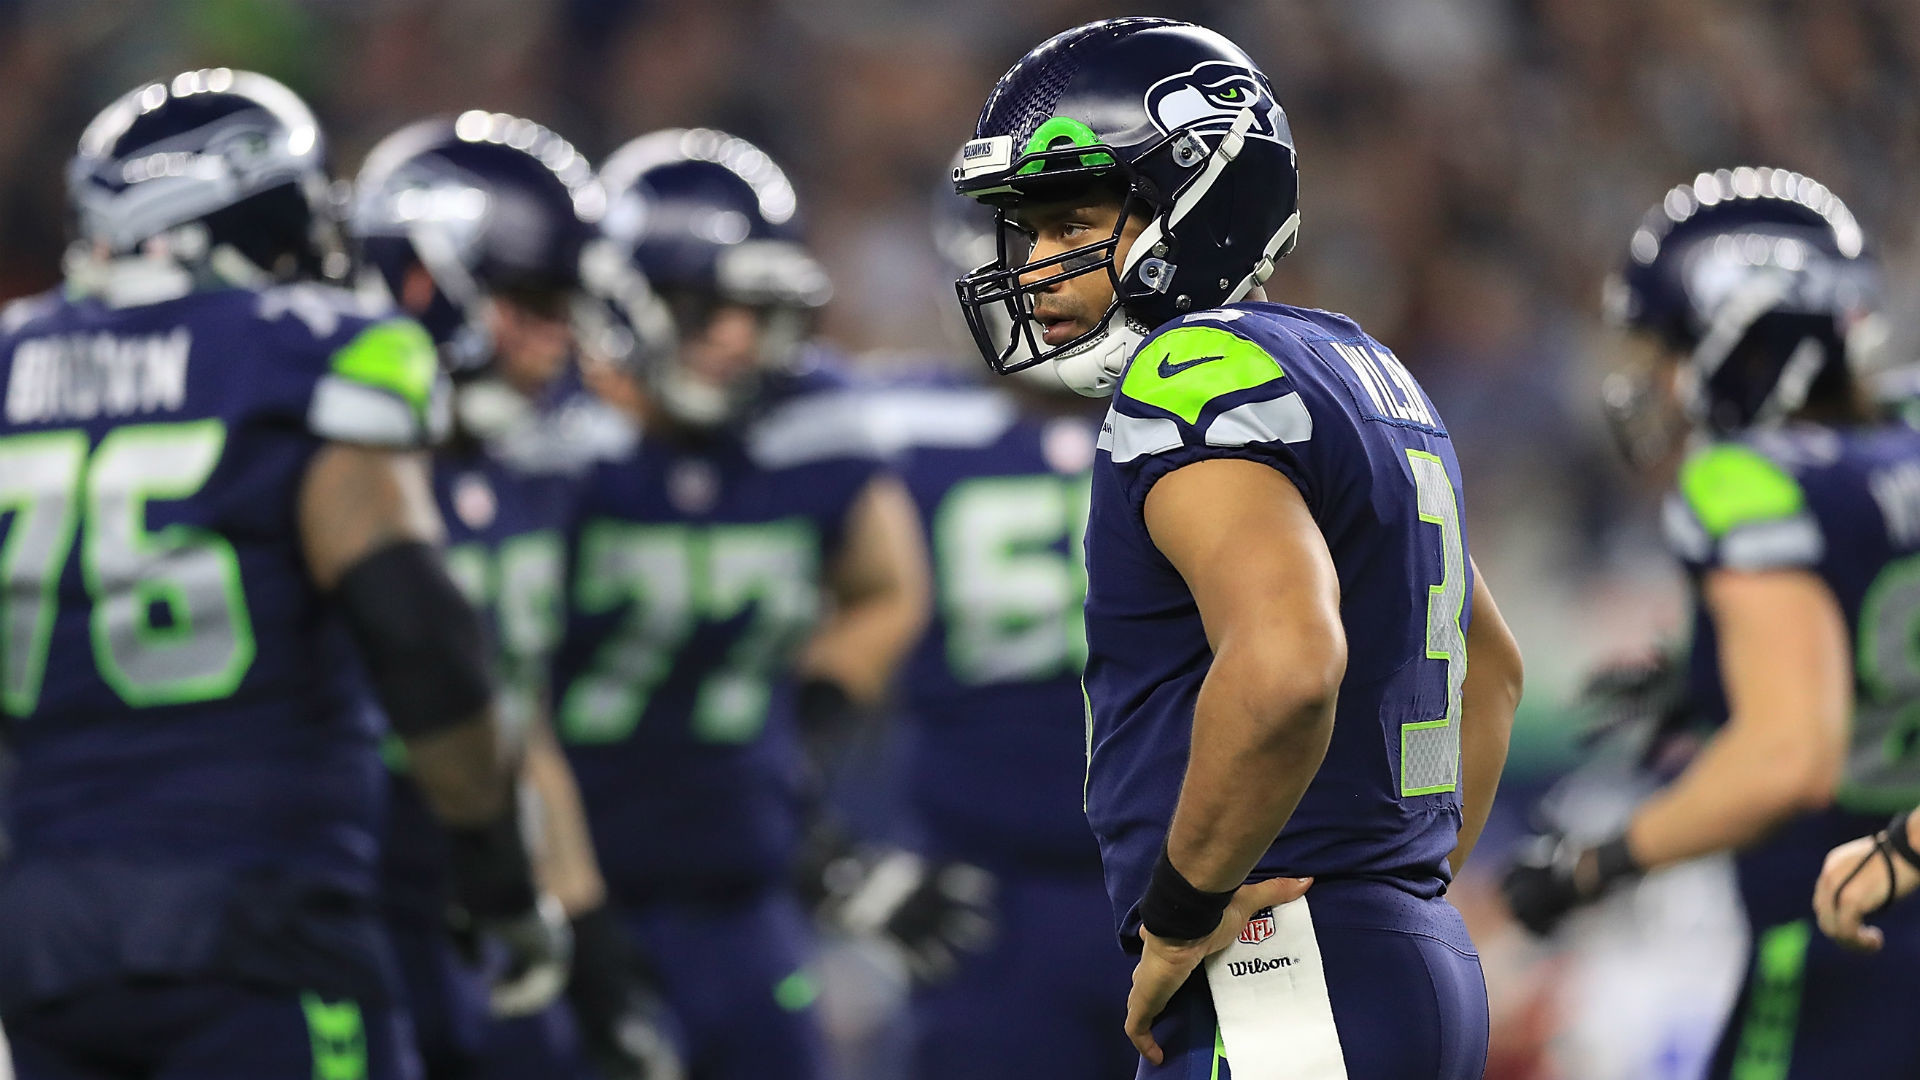 1920x1080 Legion of Boom goes bust: Seahawks finally are Russell Wilson's team